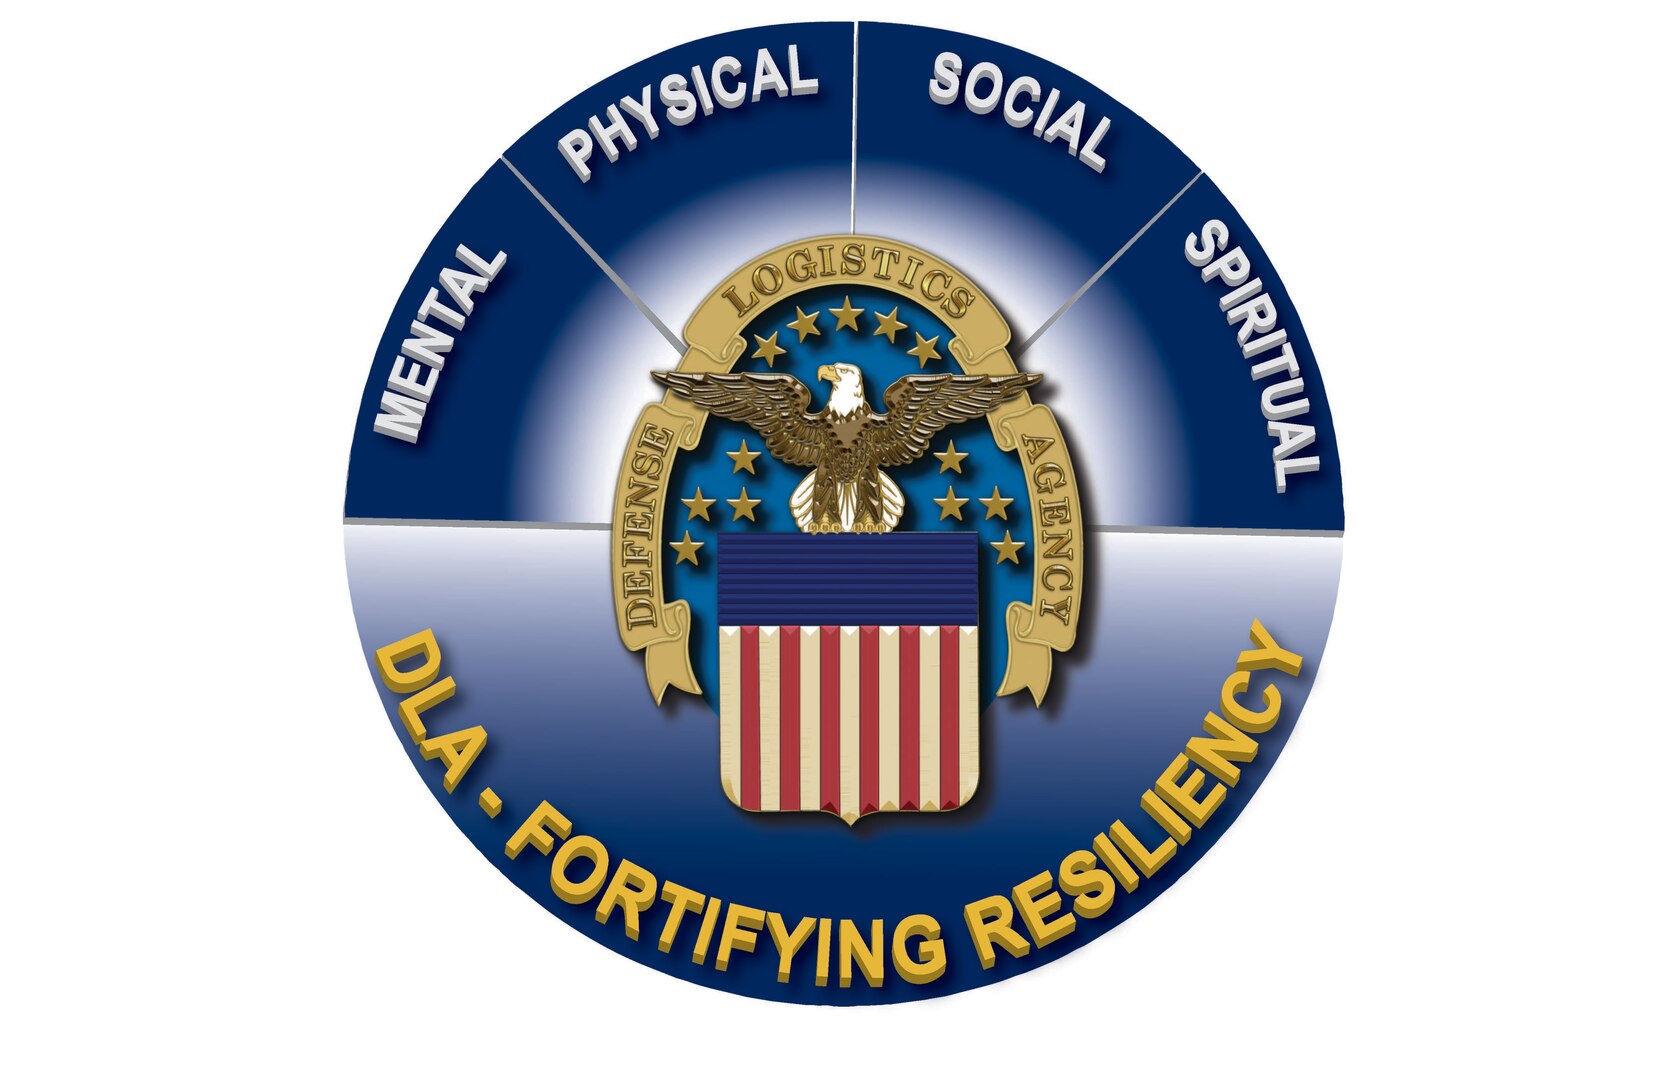 DLA initiates resiliency training through the Learning Management System.